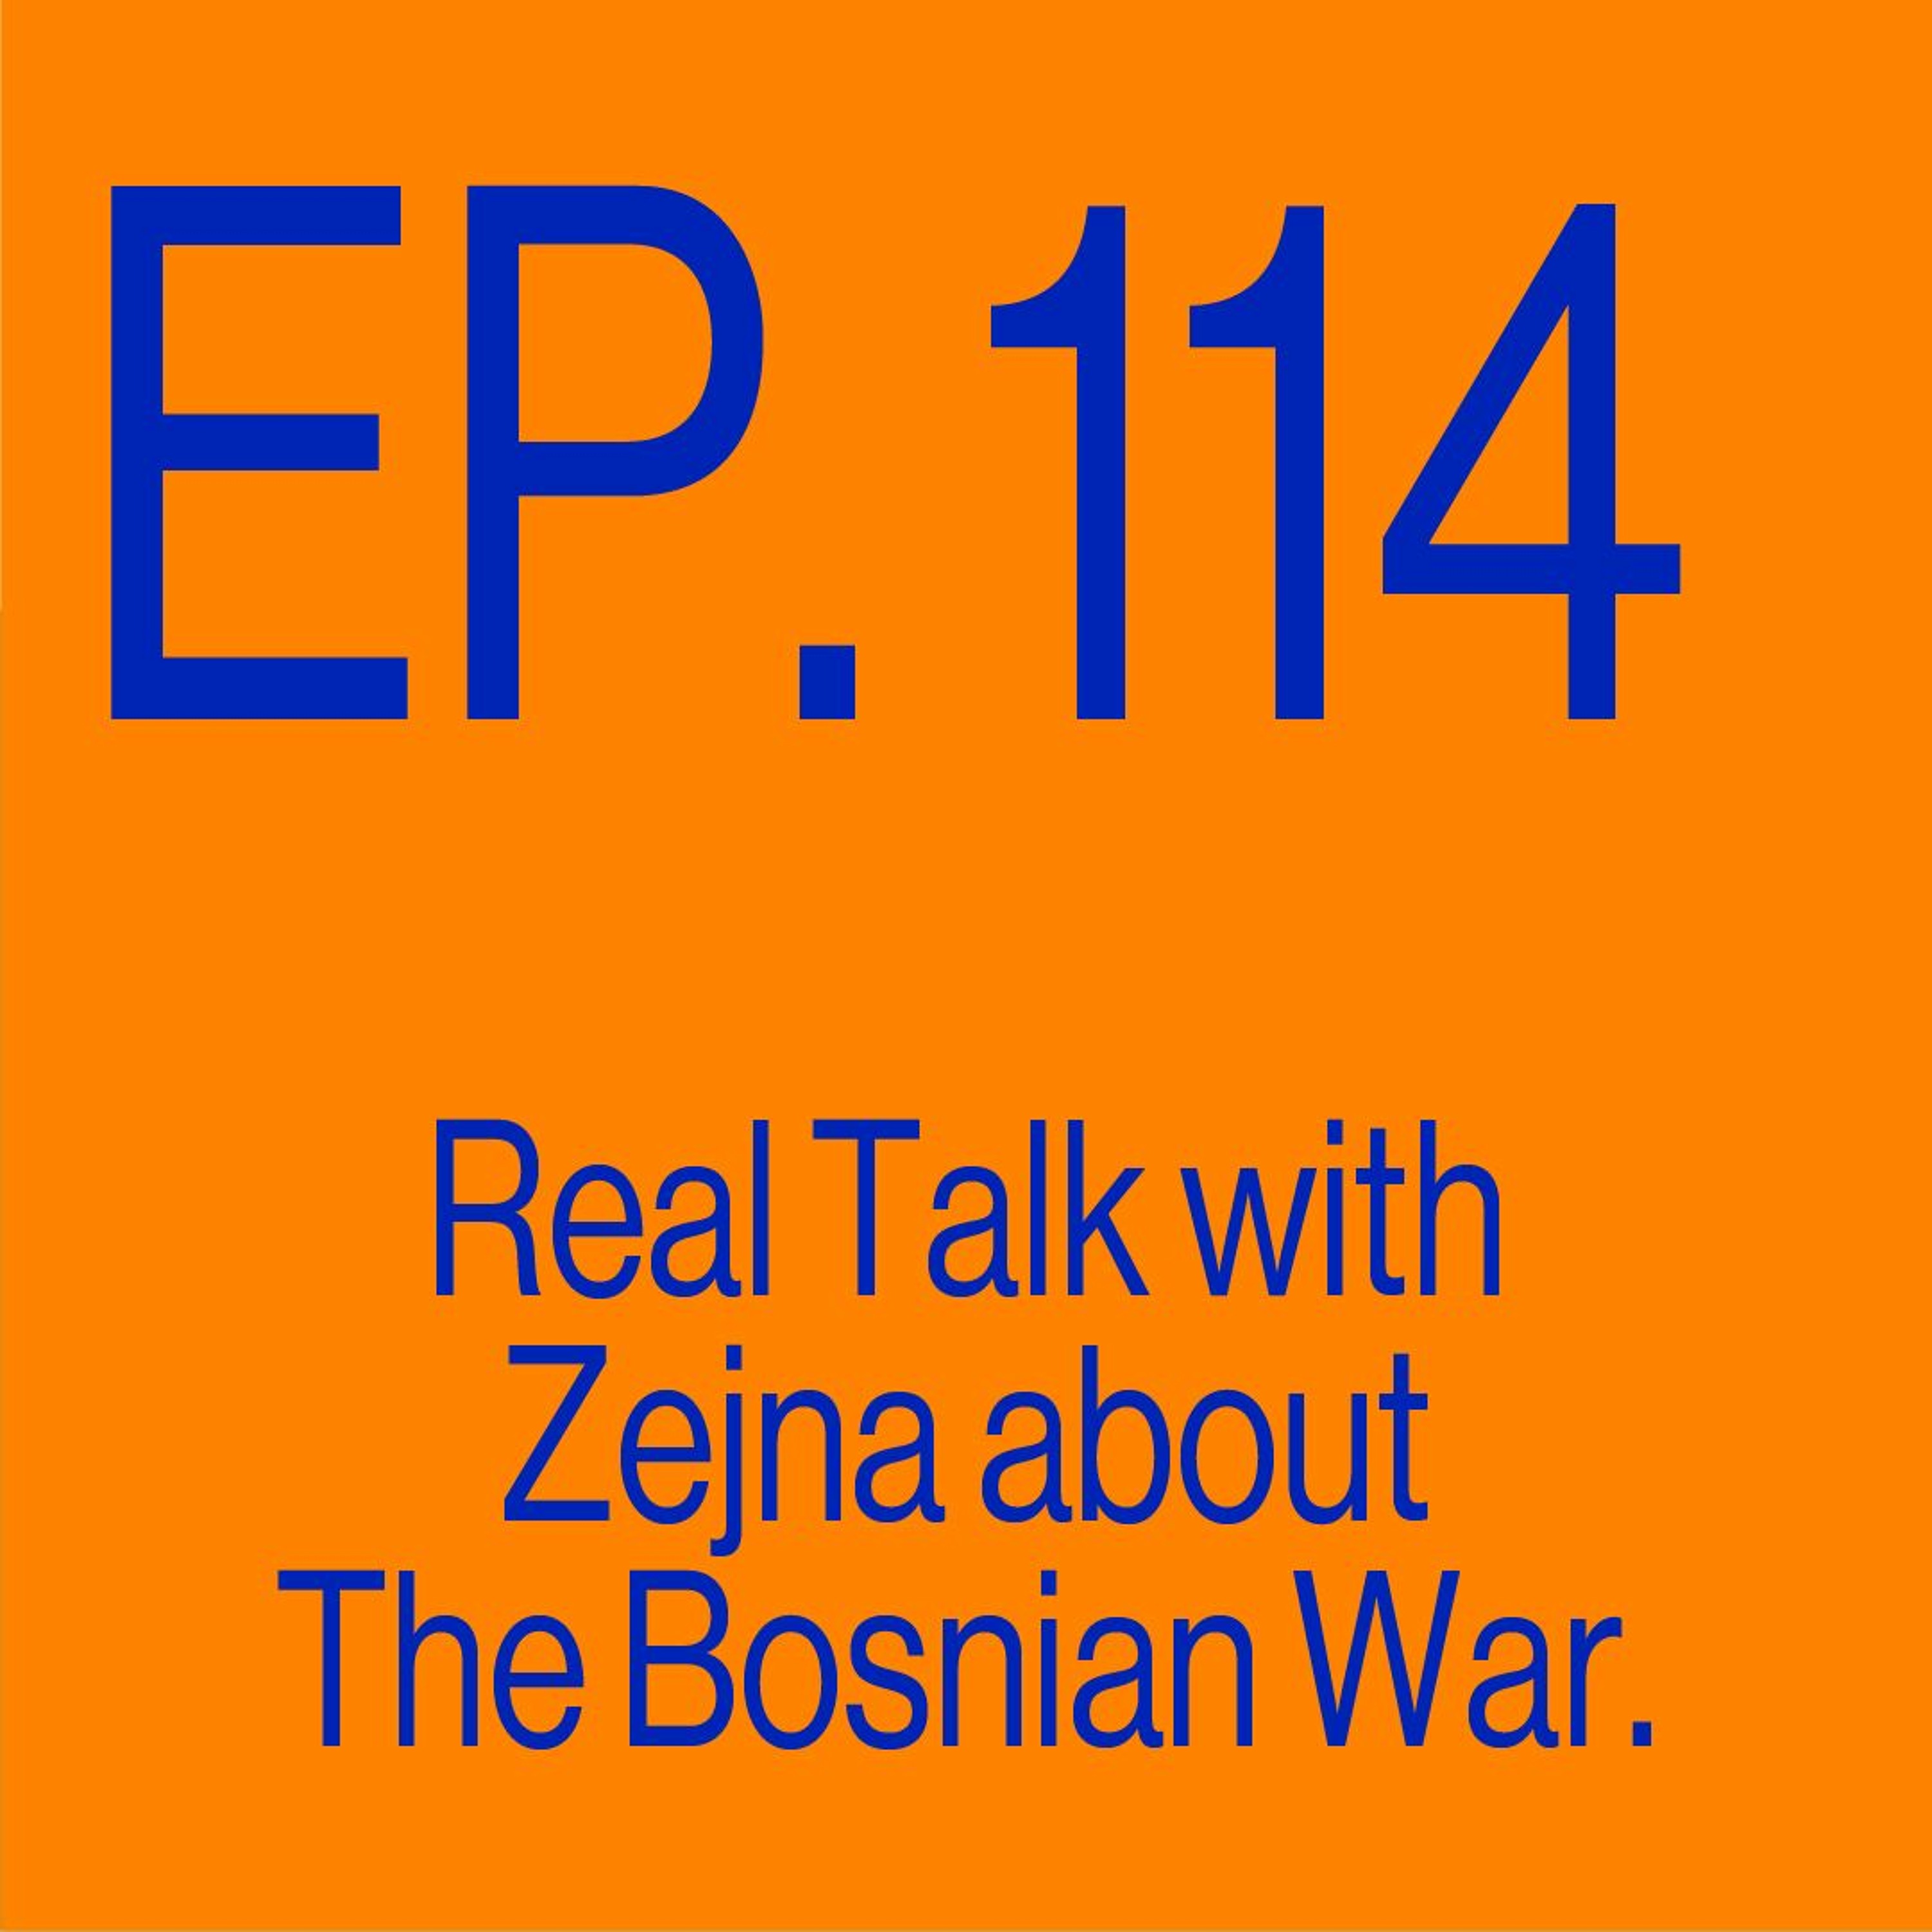 Episode 114: Real Talk with Zejna about the Bosnian War